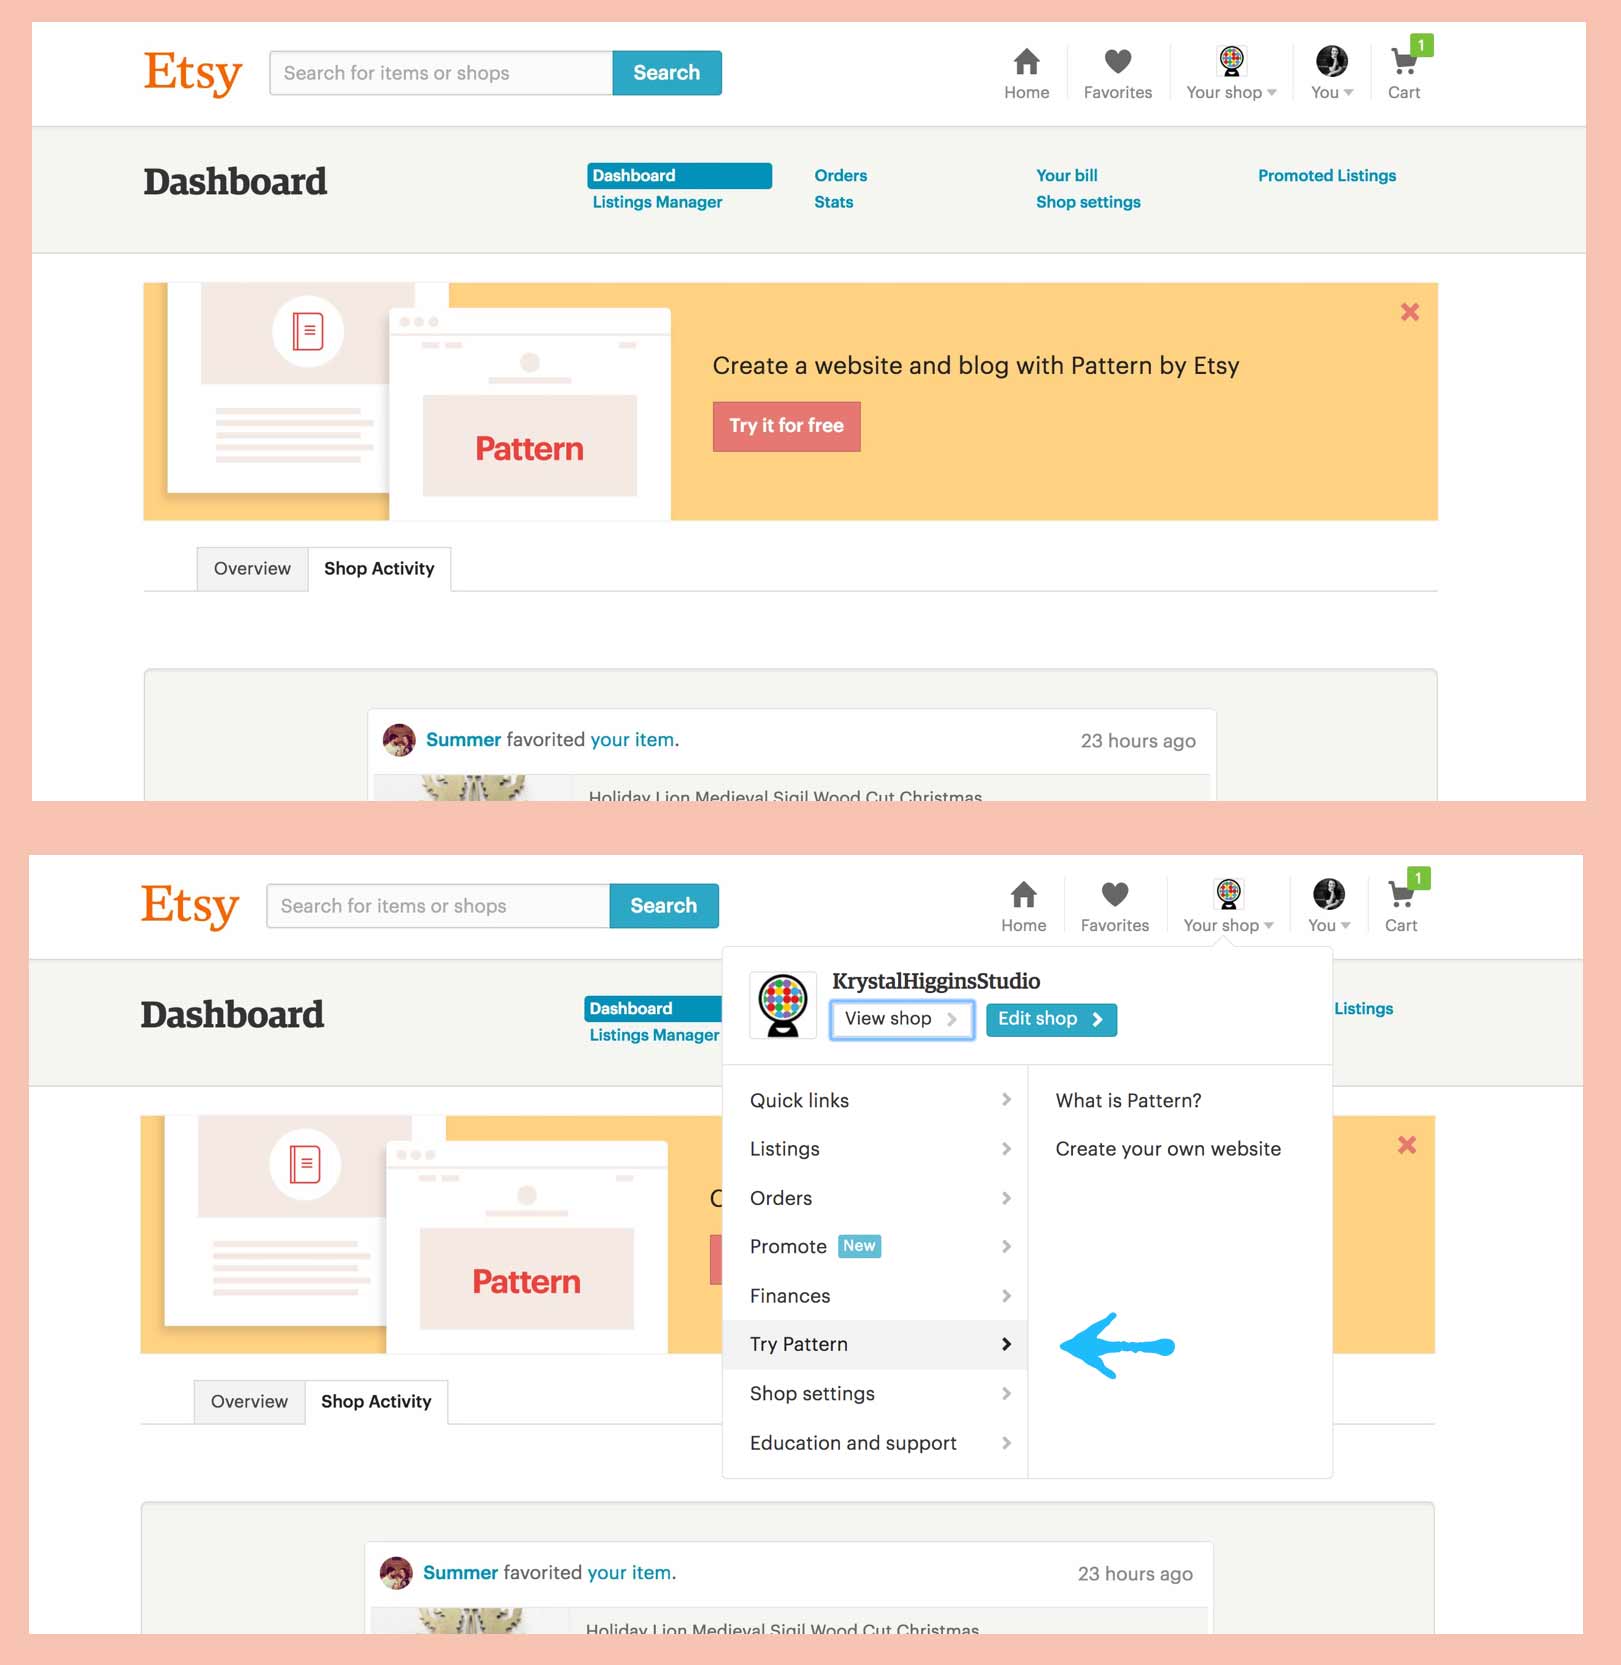 Screenshots showing Etsy's multiple paths to enter new feature onboarding